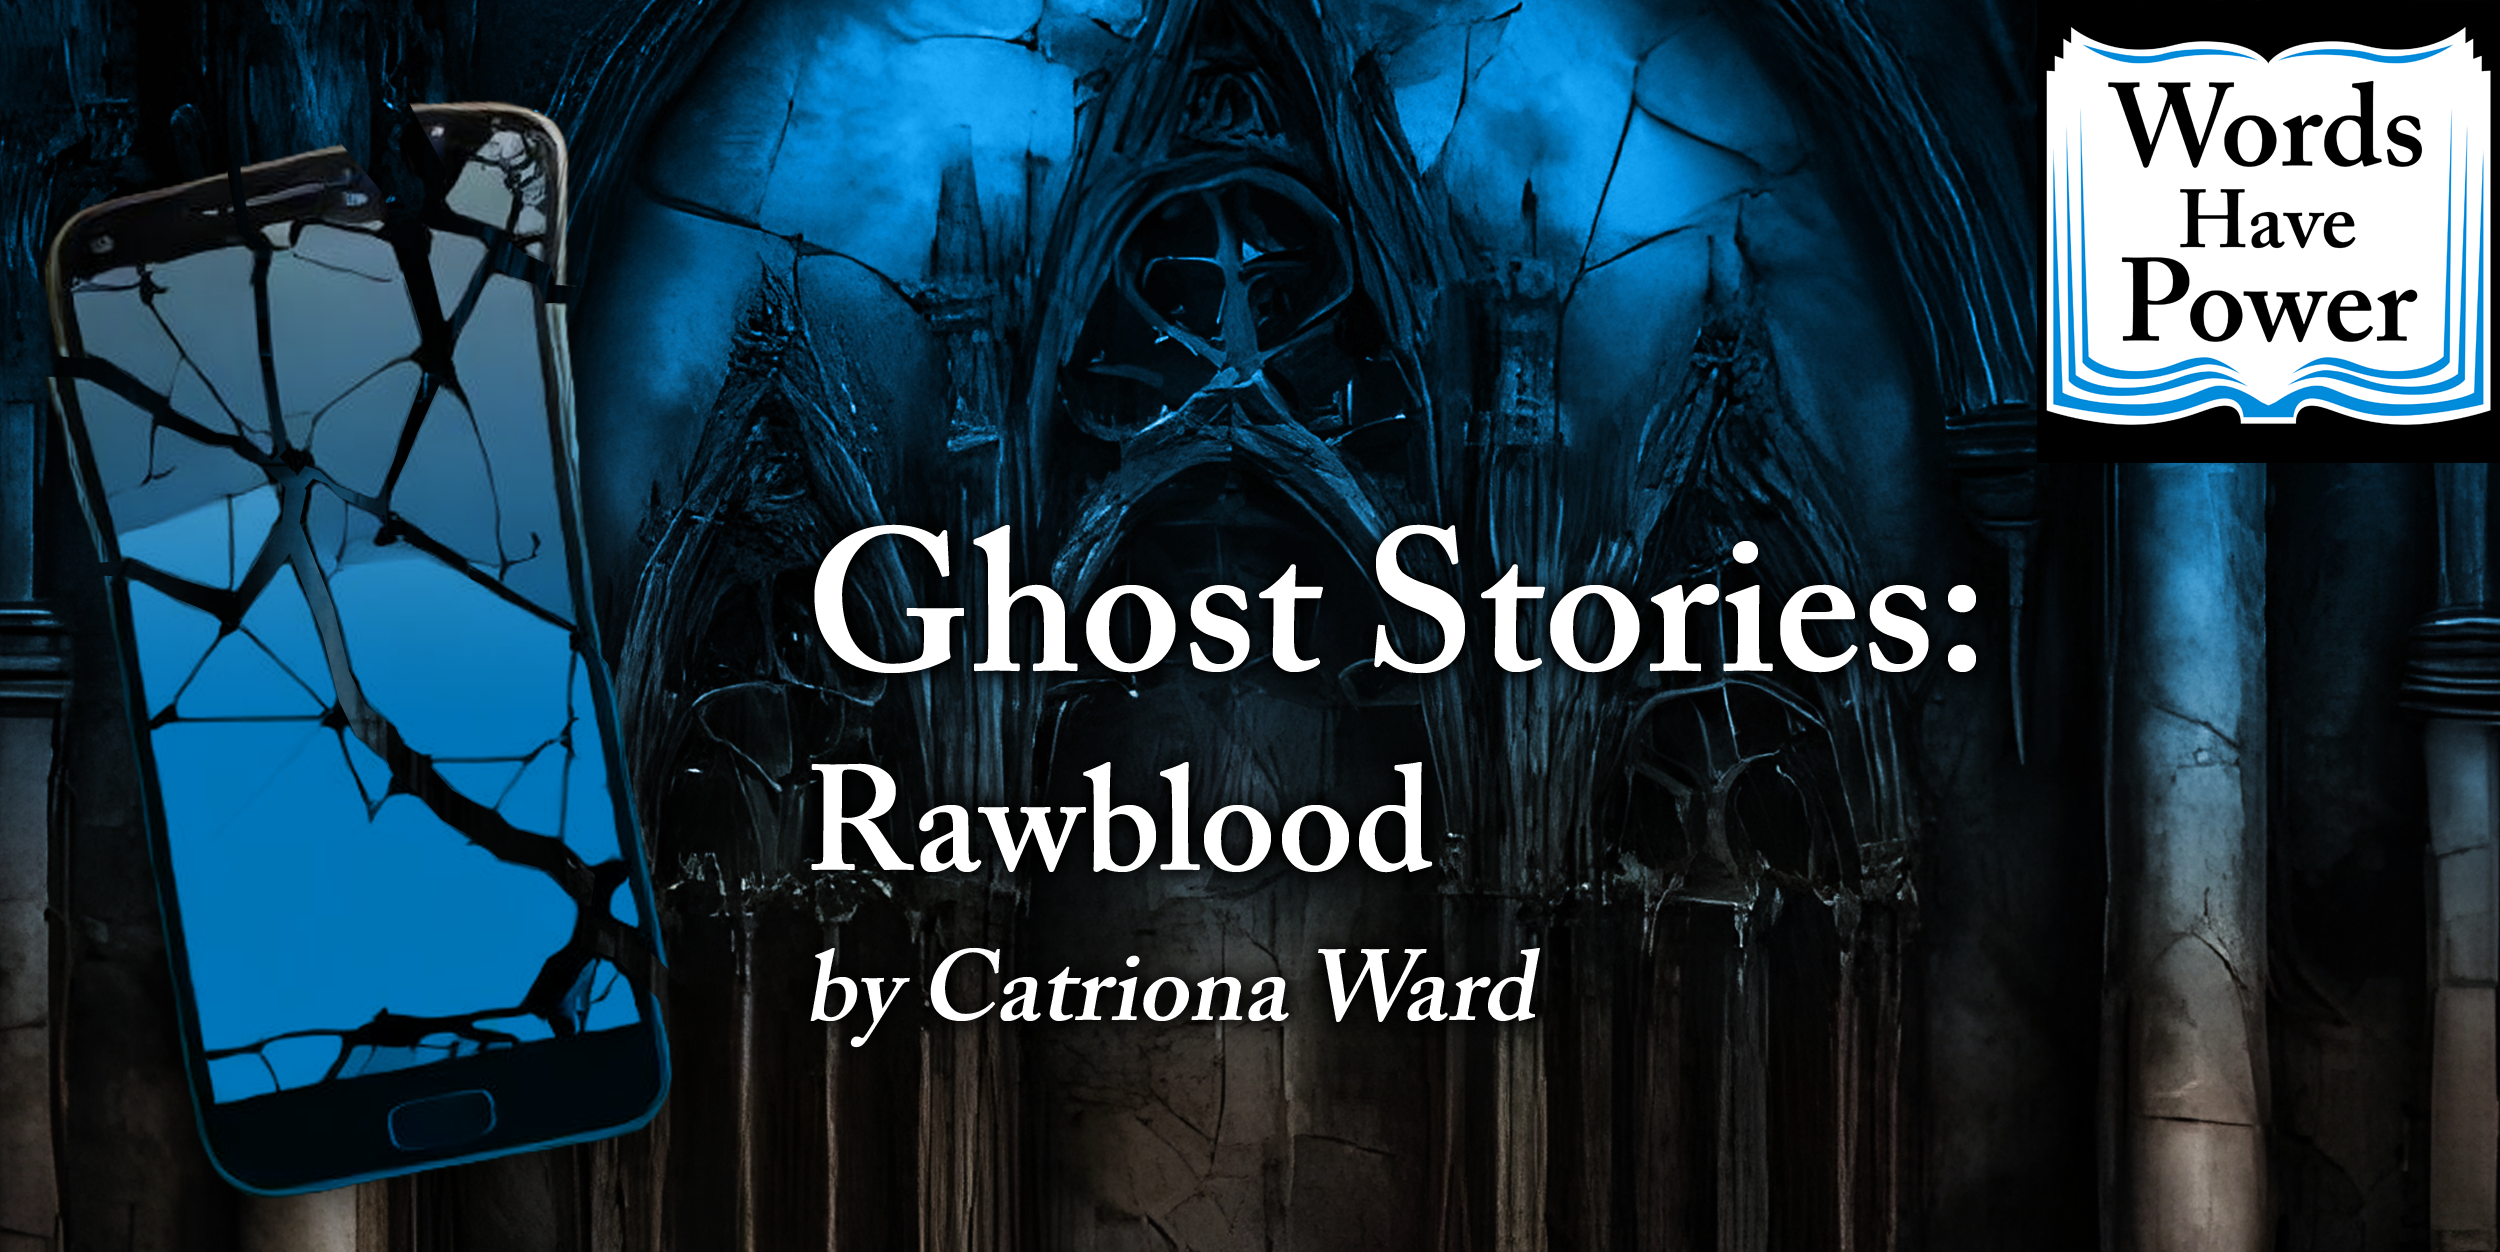 Ghost Stories: Rawblood by Catriona Ward